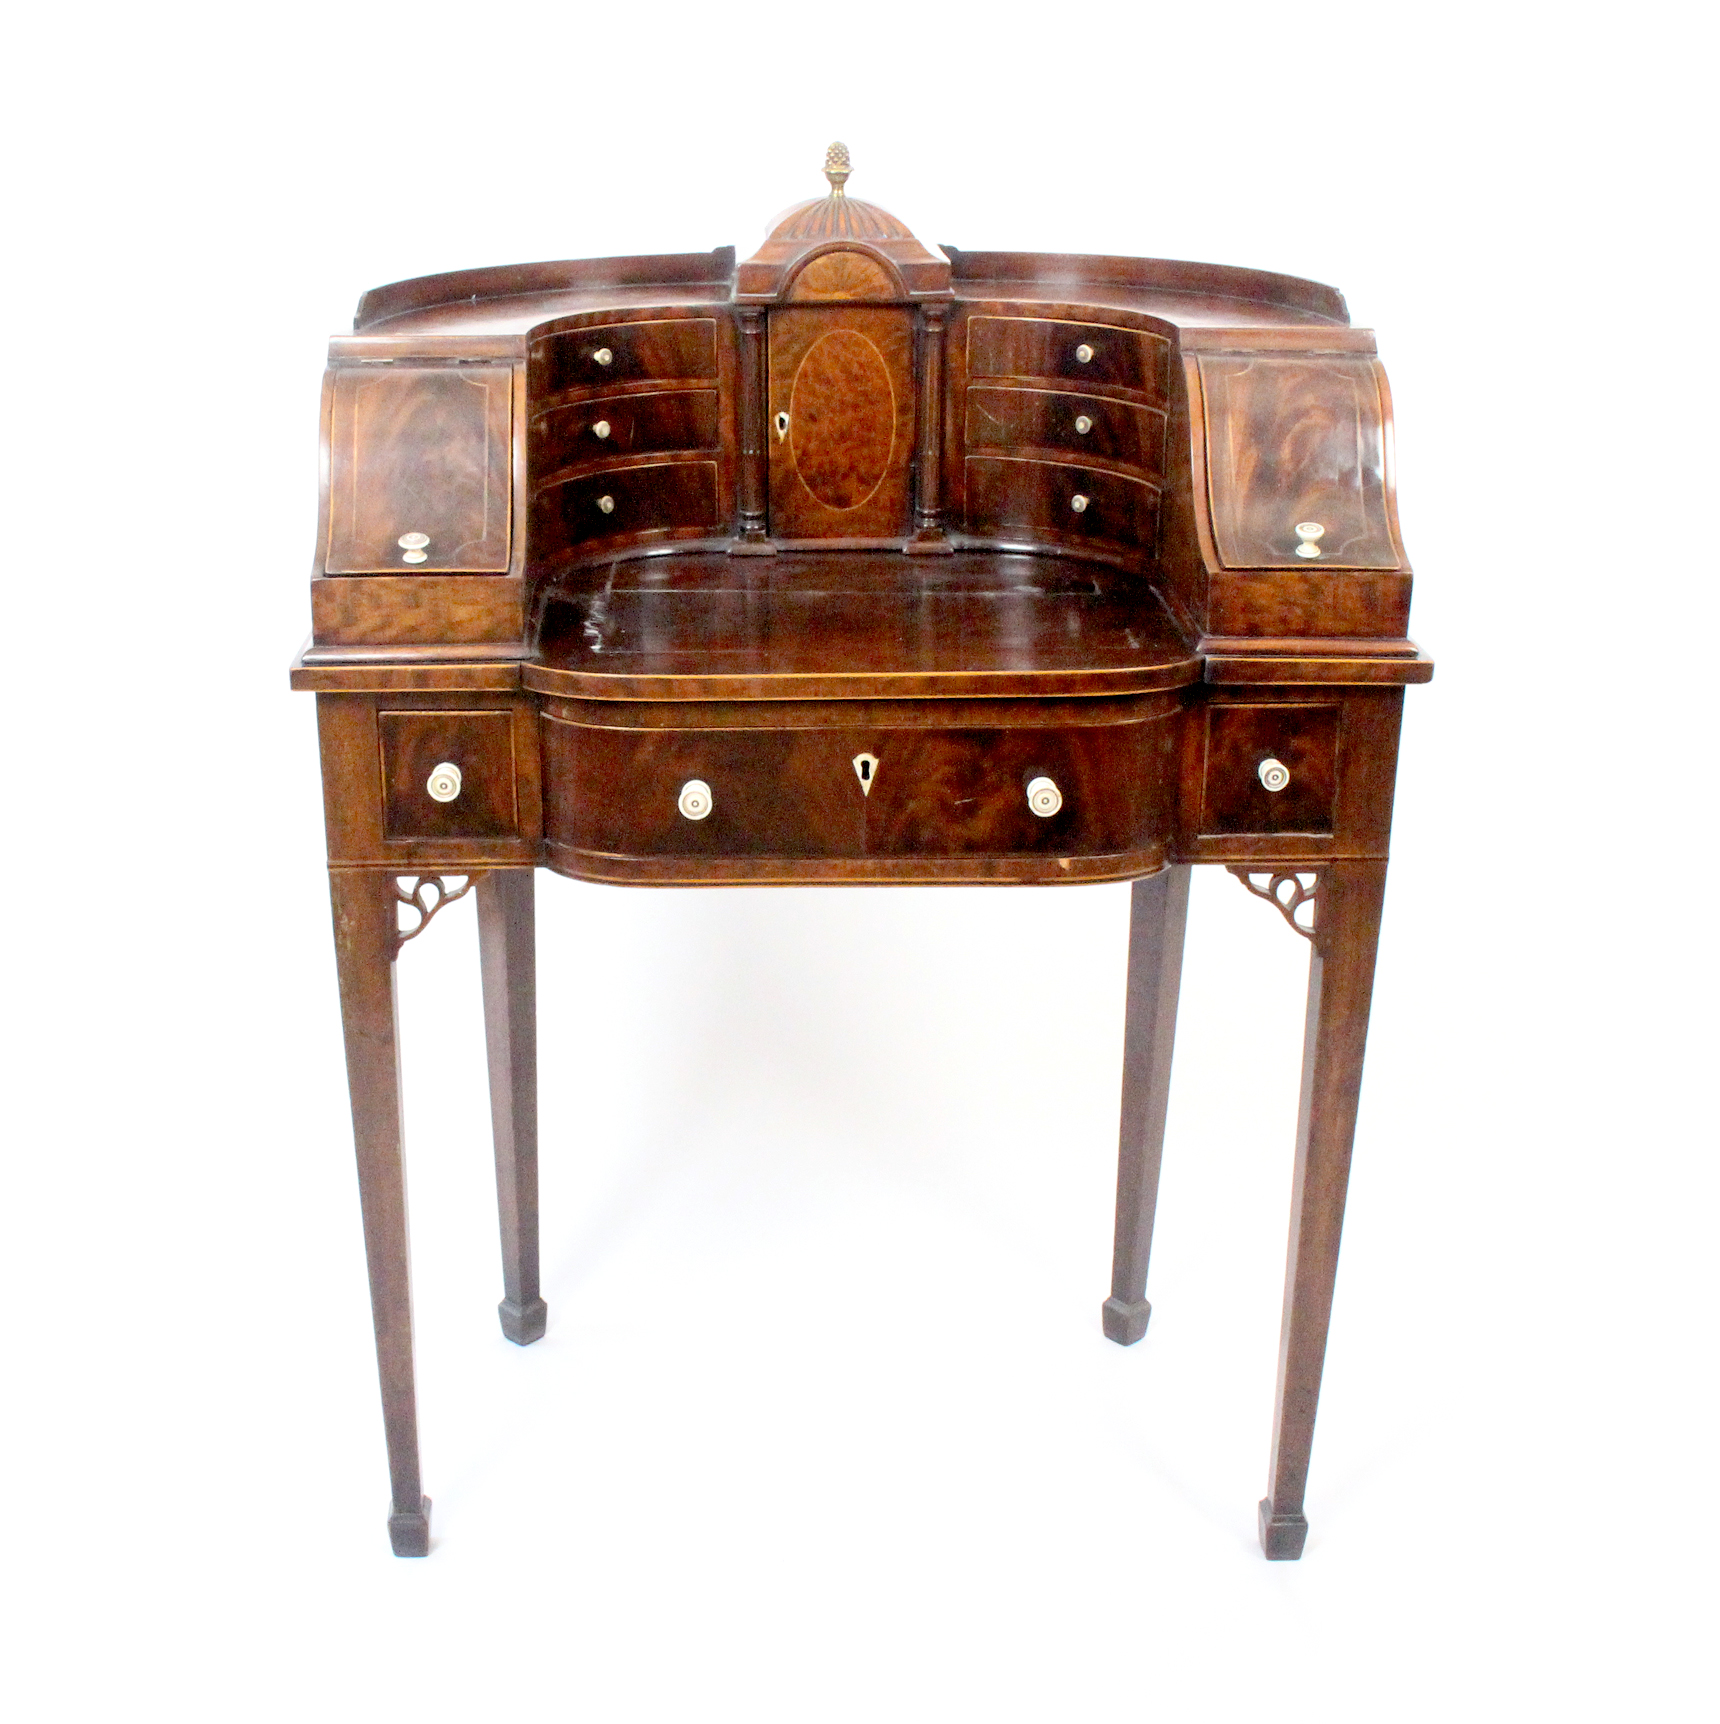 A late 19th century Sheraton style lady’s writing table, the concave superstructure centred by a - Image 2 of 2